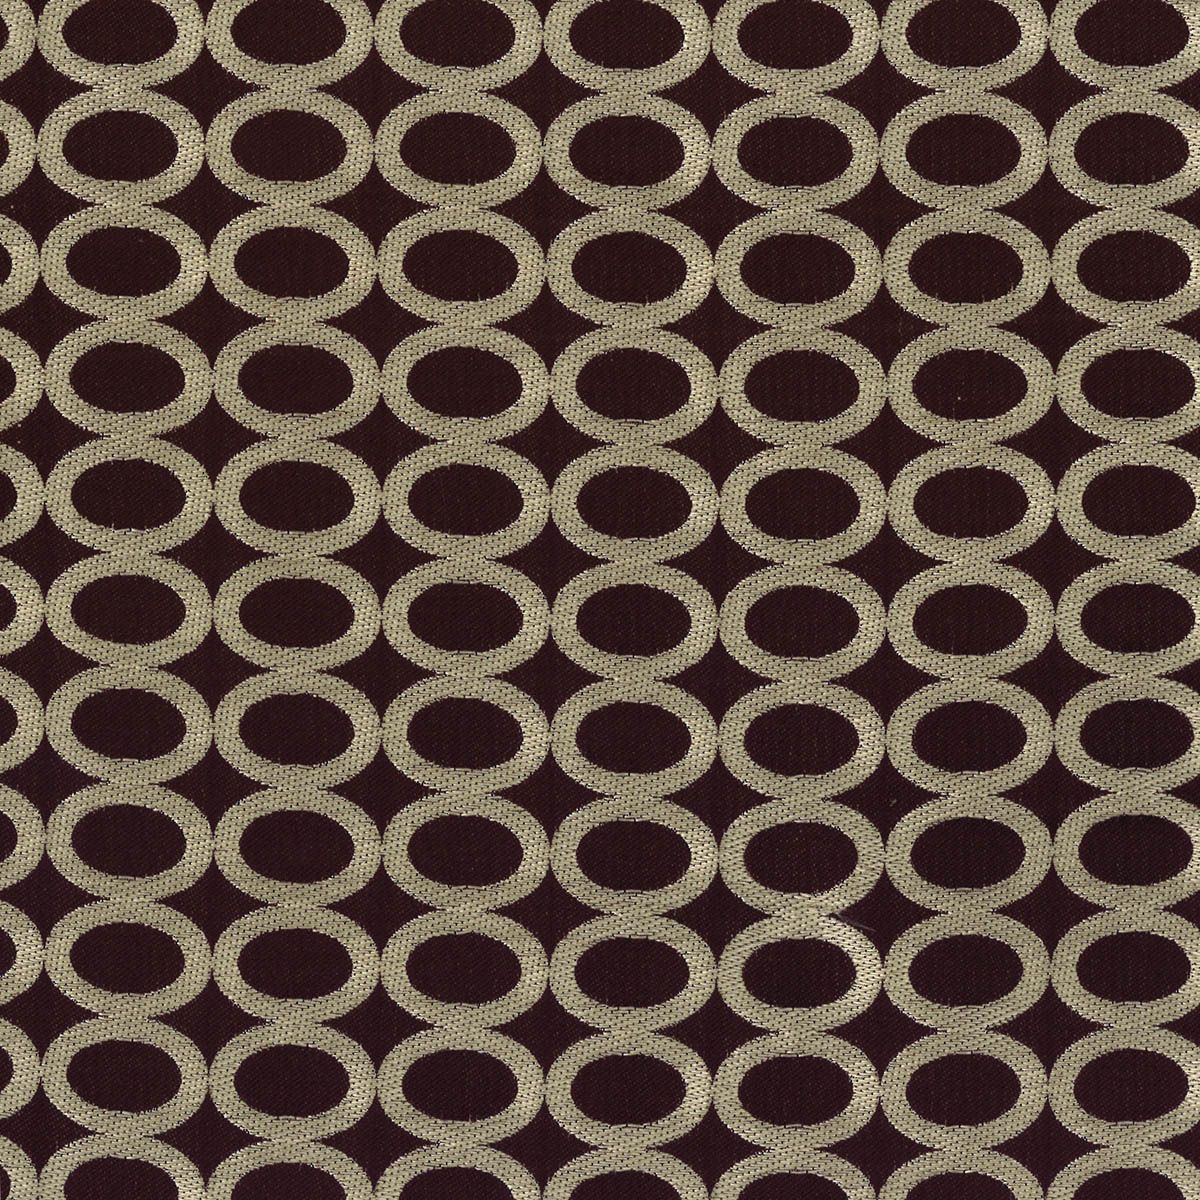 Jete fabric in espresso color - pattern number NG 00011997 - by Scalamandre in the Old World Weavers collection